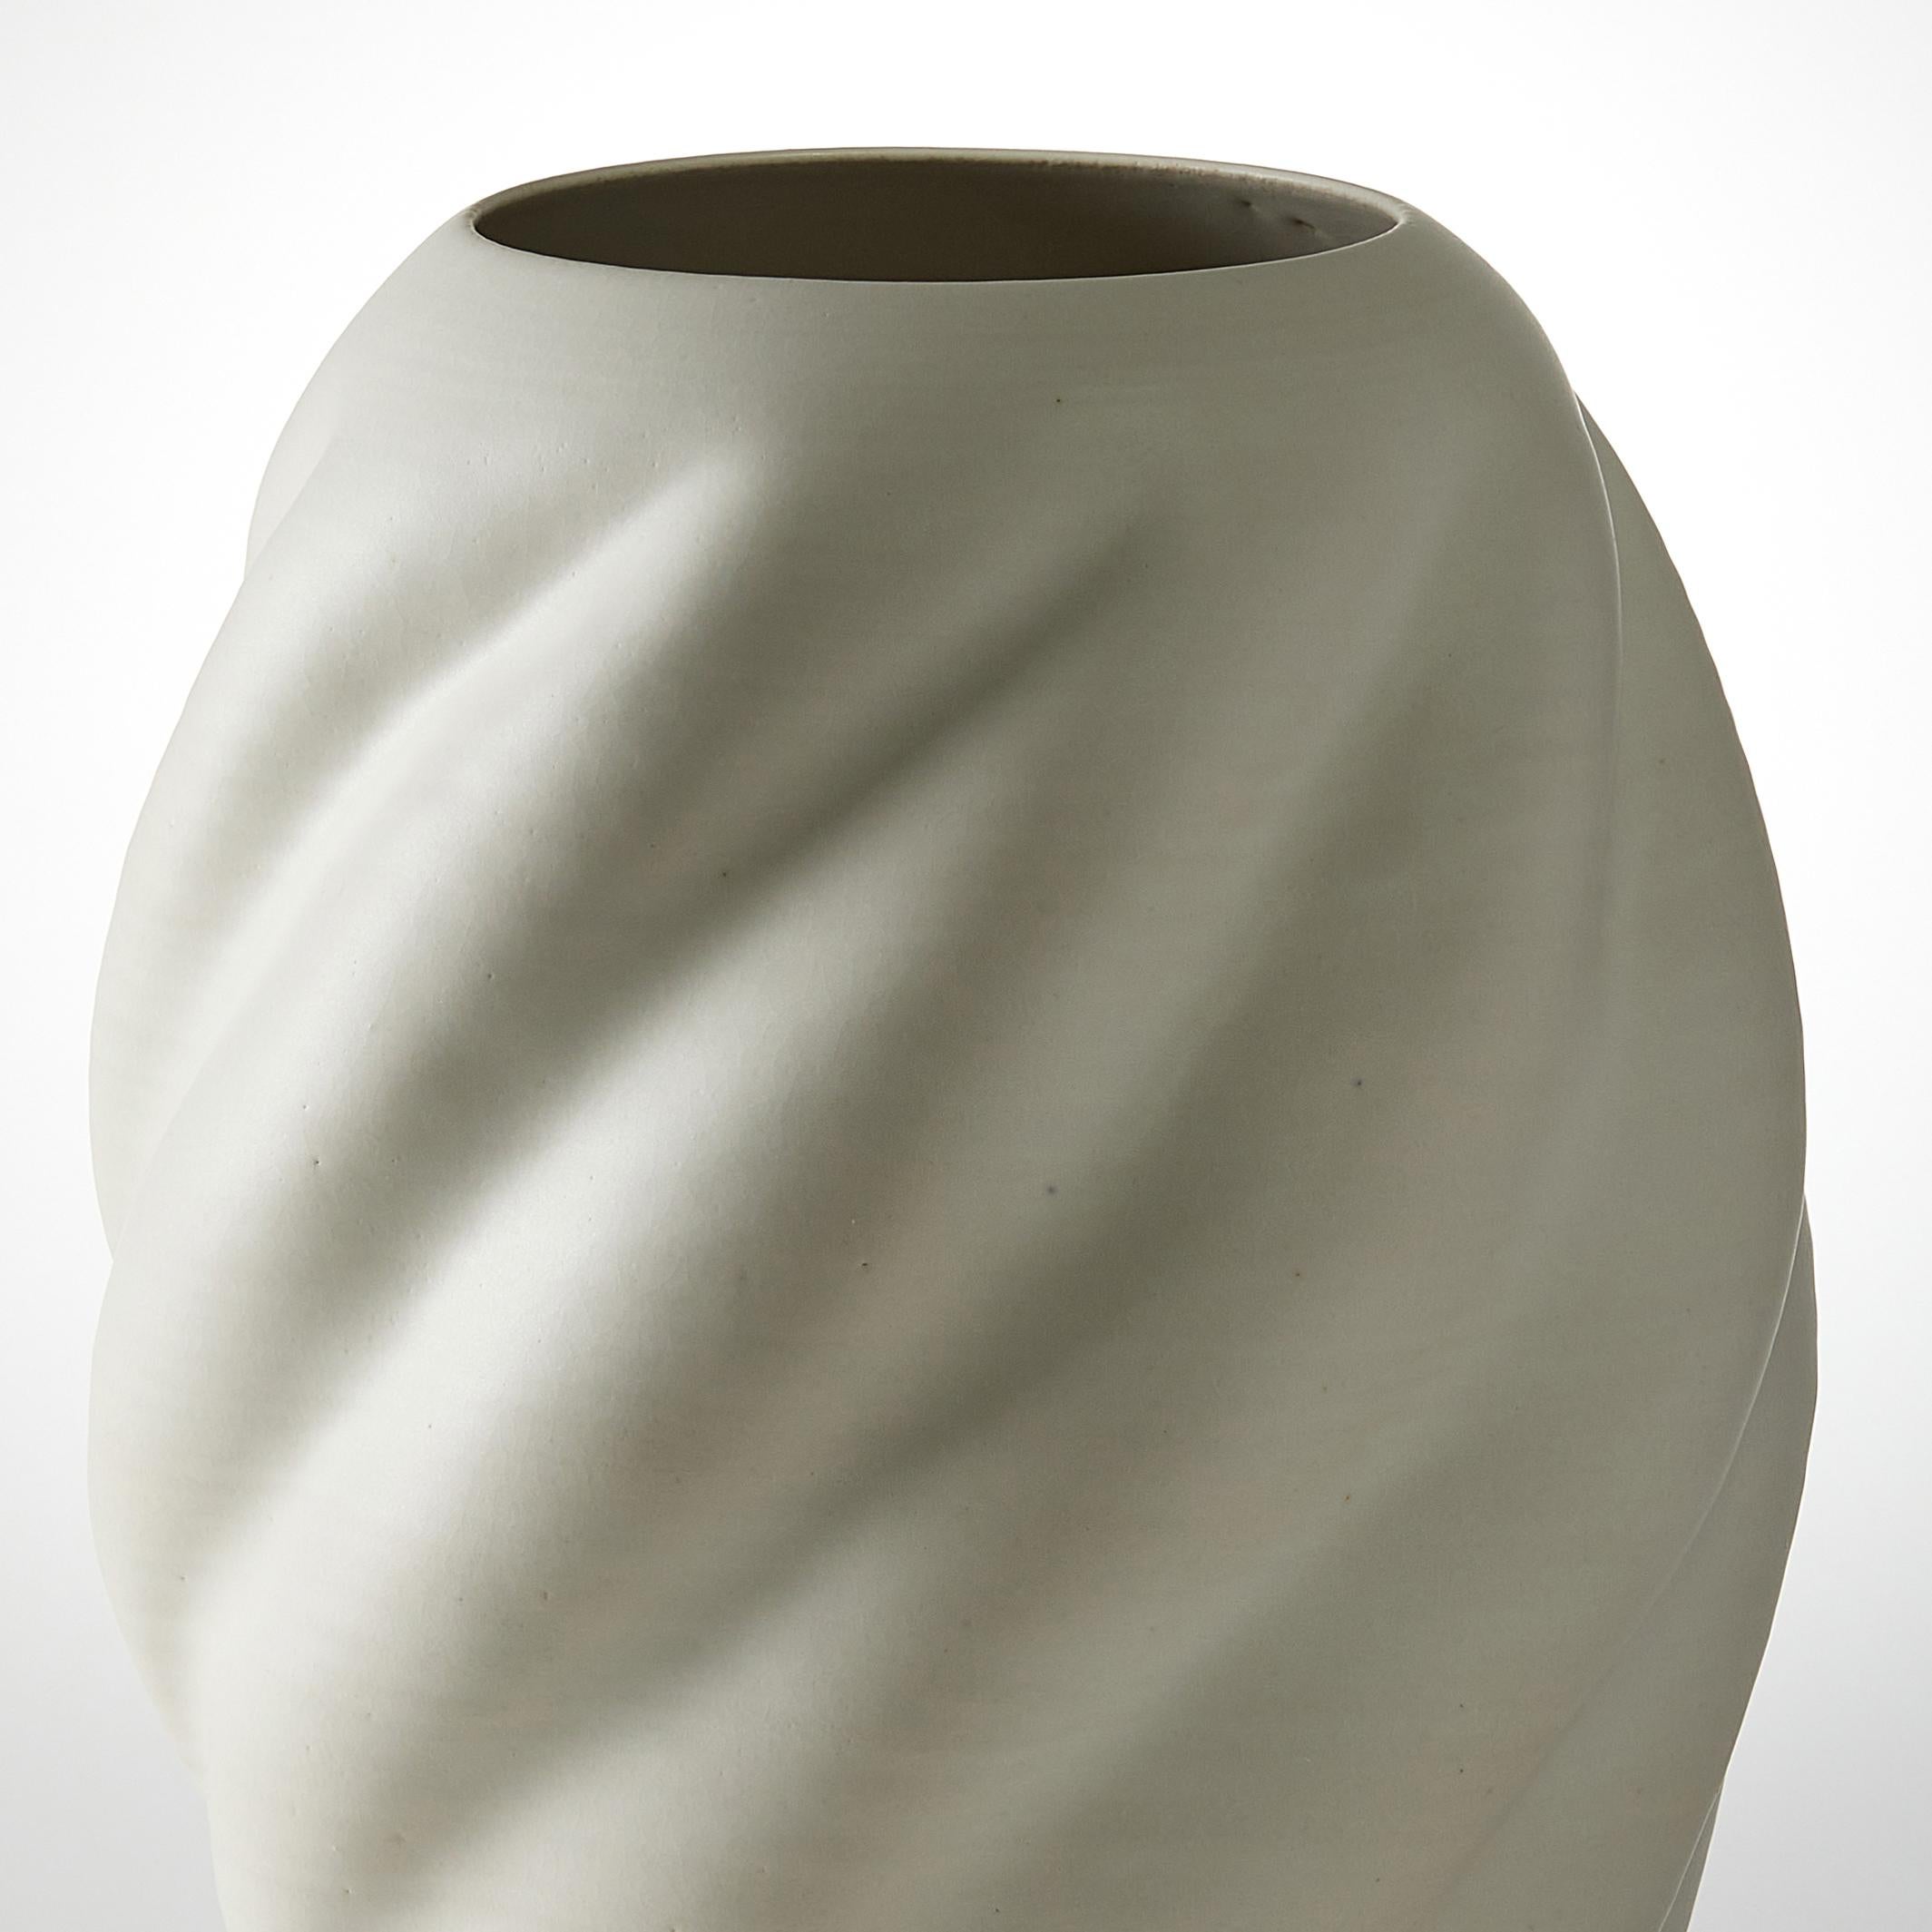 Hand-Crafted Tall White wave Form No 44, a unique Ceramic Vessel by Nicholas Arroyave-Portela